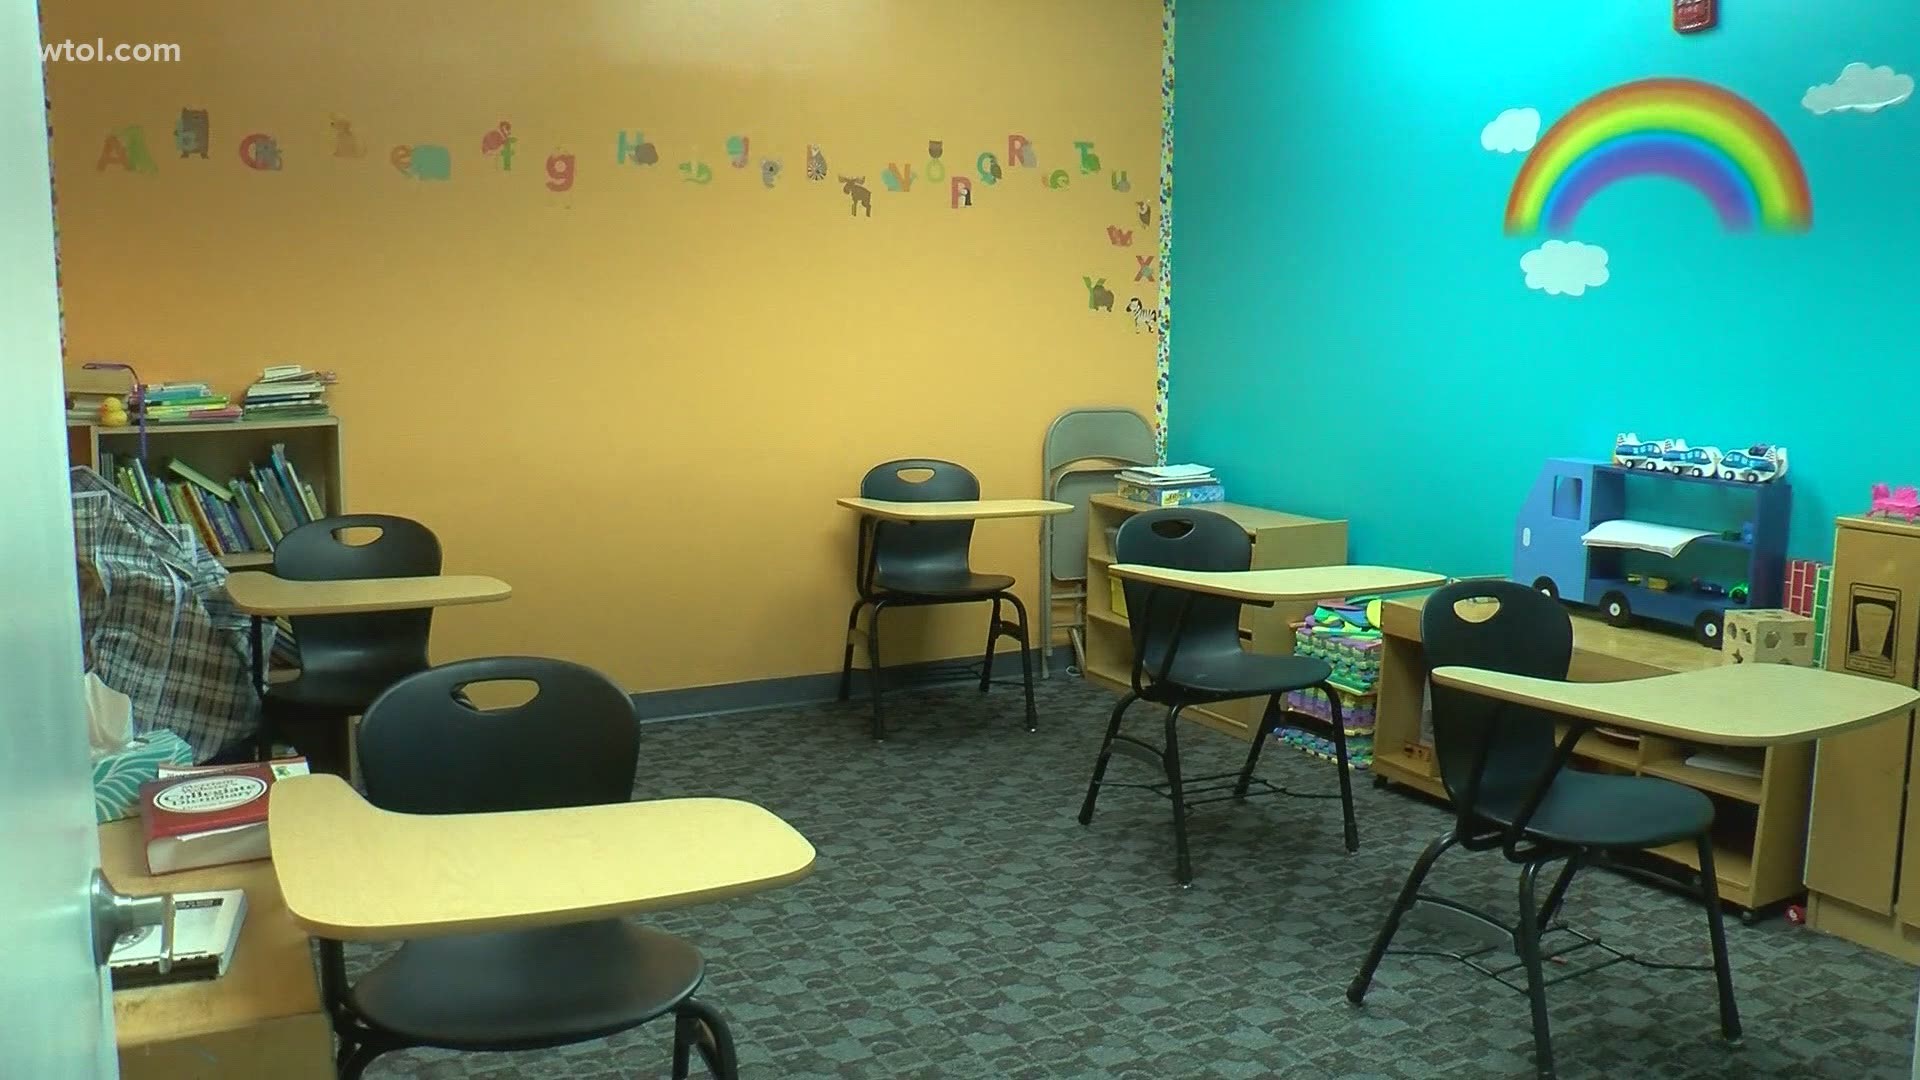 A local daycare has taken on students up to 8th grade to make sure they have help and access to internet services for school.